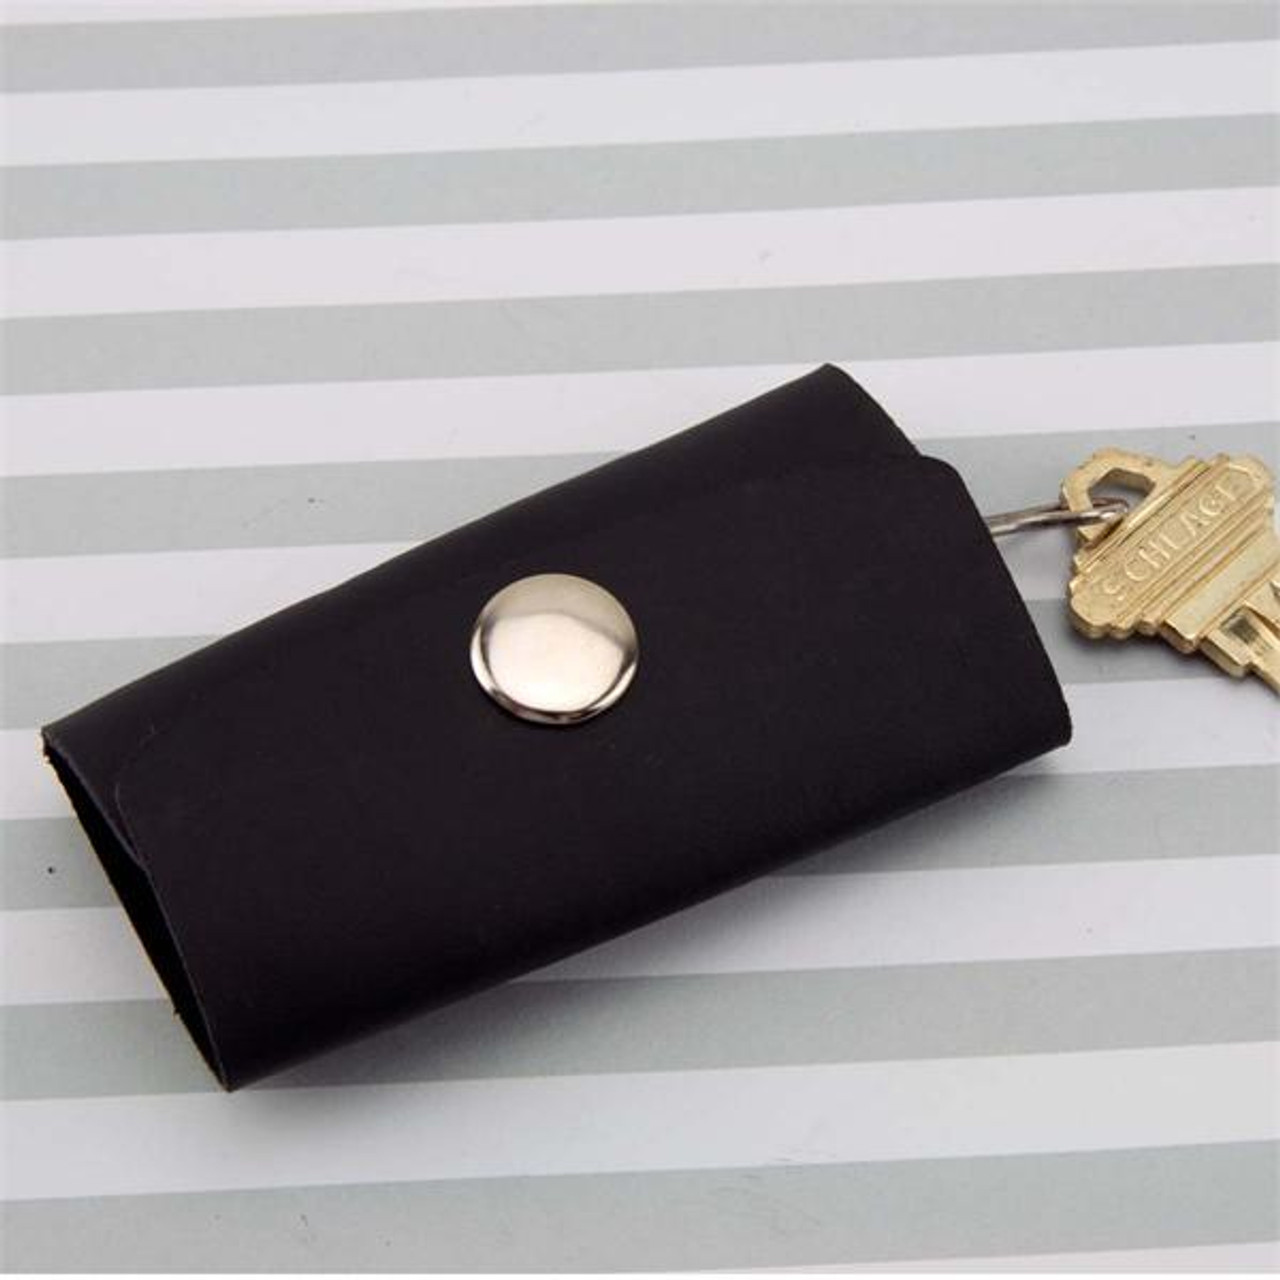 Leather Key Holder With Pull Strap Keychain Key Pouch 